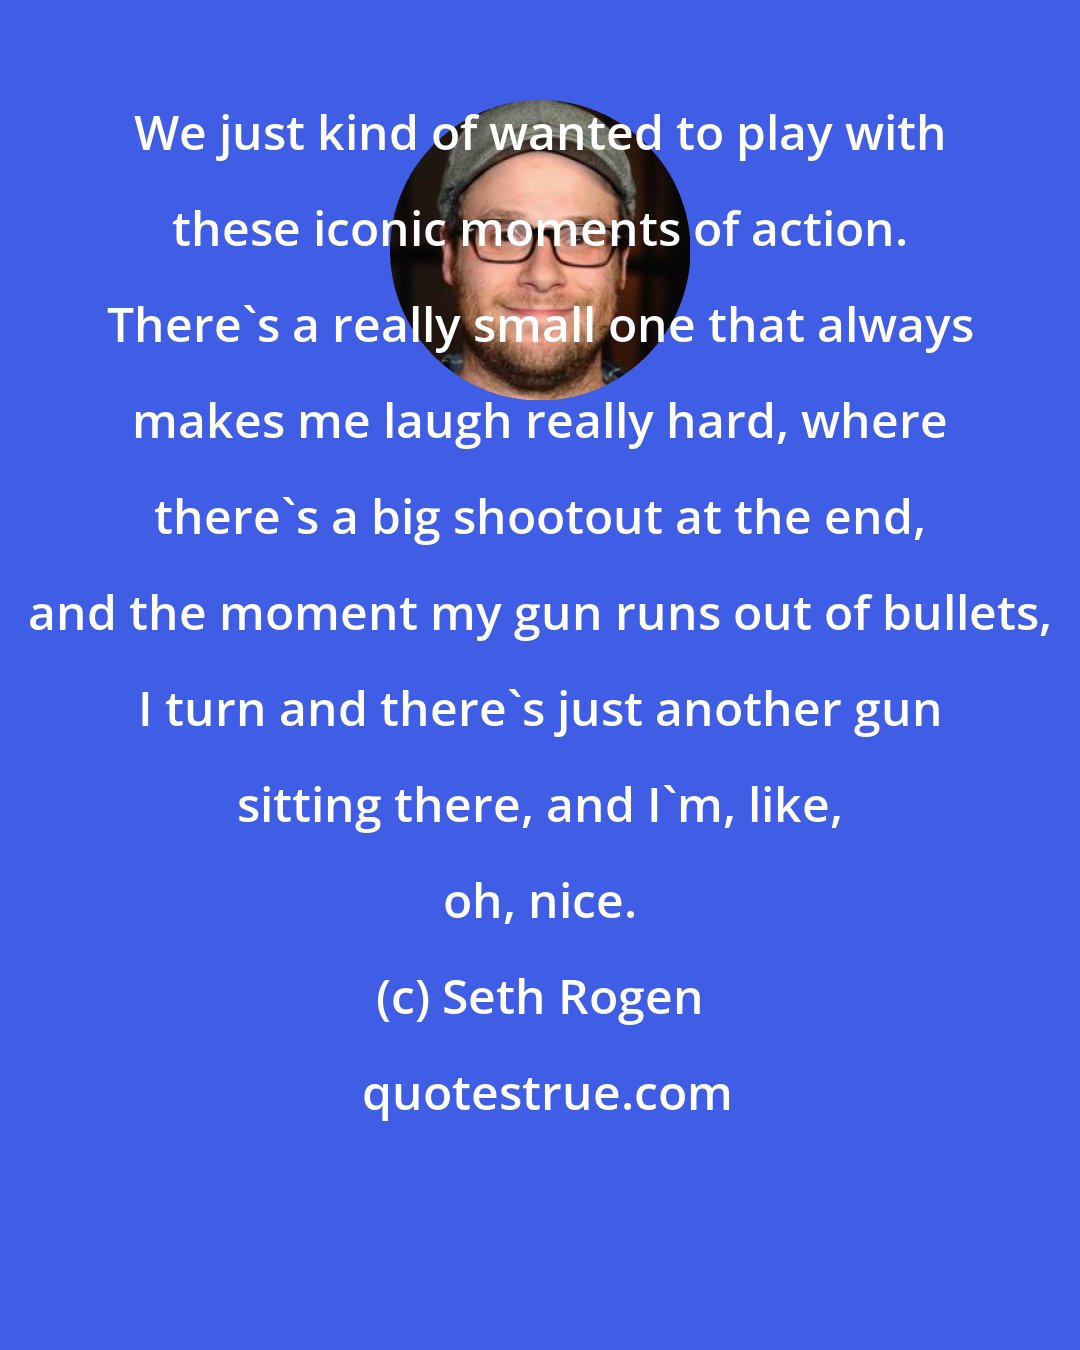 Seth Rogen: We just kind of wanted to play with these iconic moments of action. There's a really small one that always makes me laugh really hard, where there's a big shootout at the end, and the moment my gun runs out of bullets, I turn and there's just another gun sitting there, and I'm, like, oh, nice.